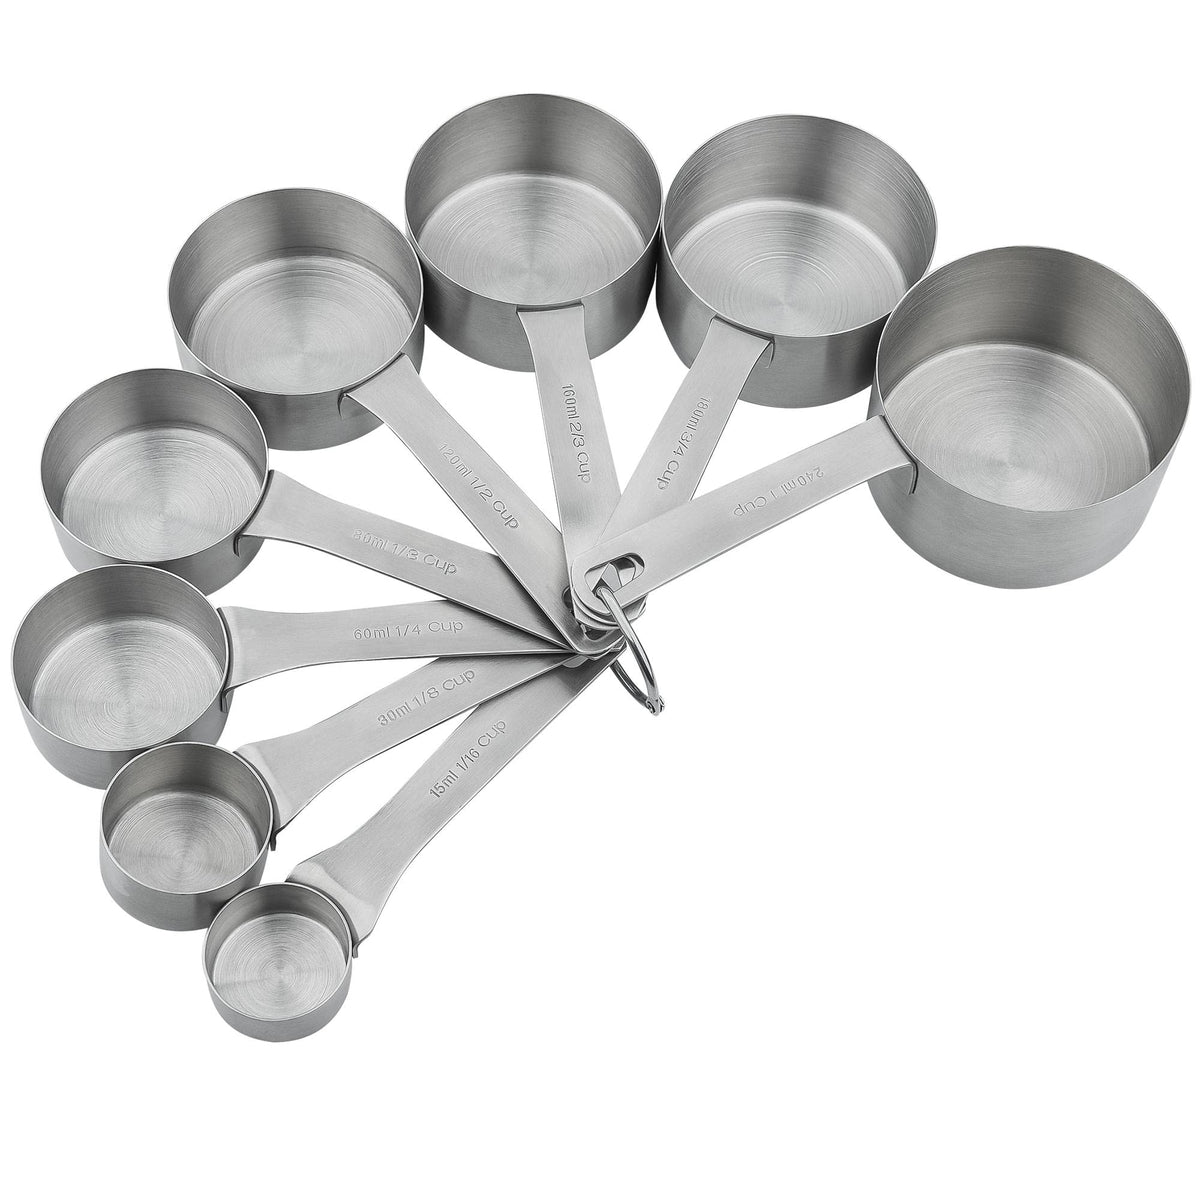 Measuring Cups and Spoons Set, 8 Piece Collapsible Measuring Cups, Sil —  CHIMIYA